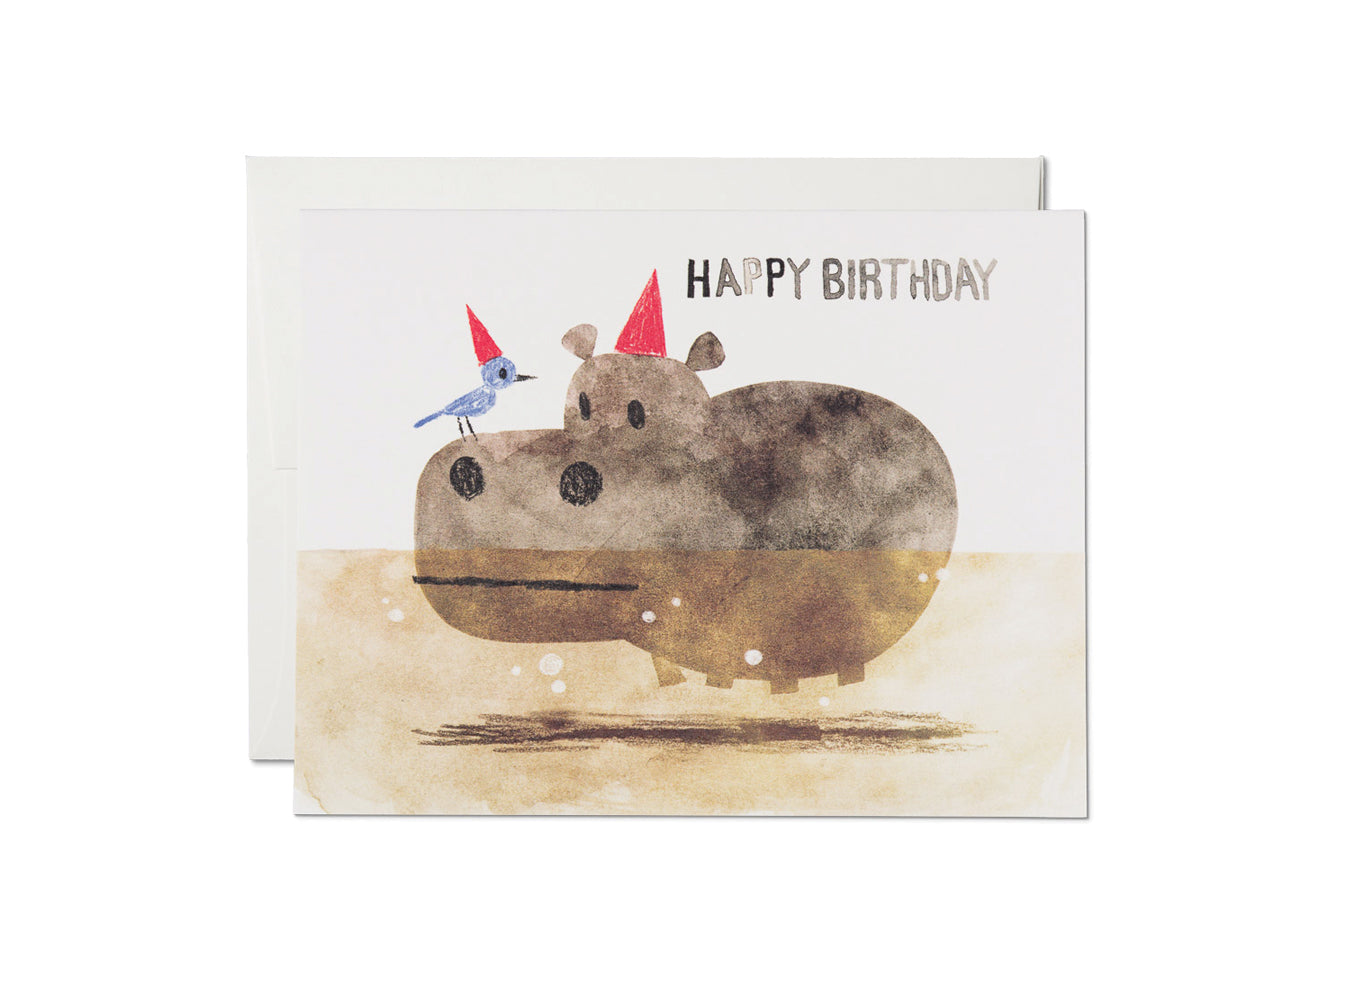 Red Cap Cards "Happy Birthday" Hippo Card